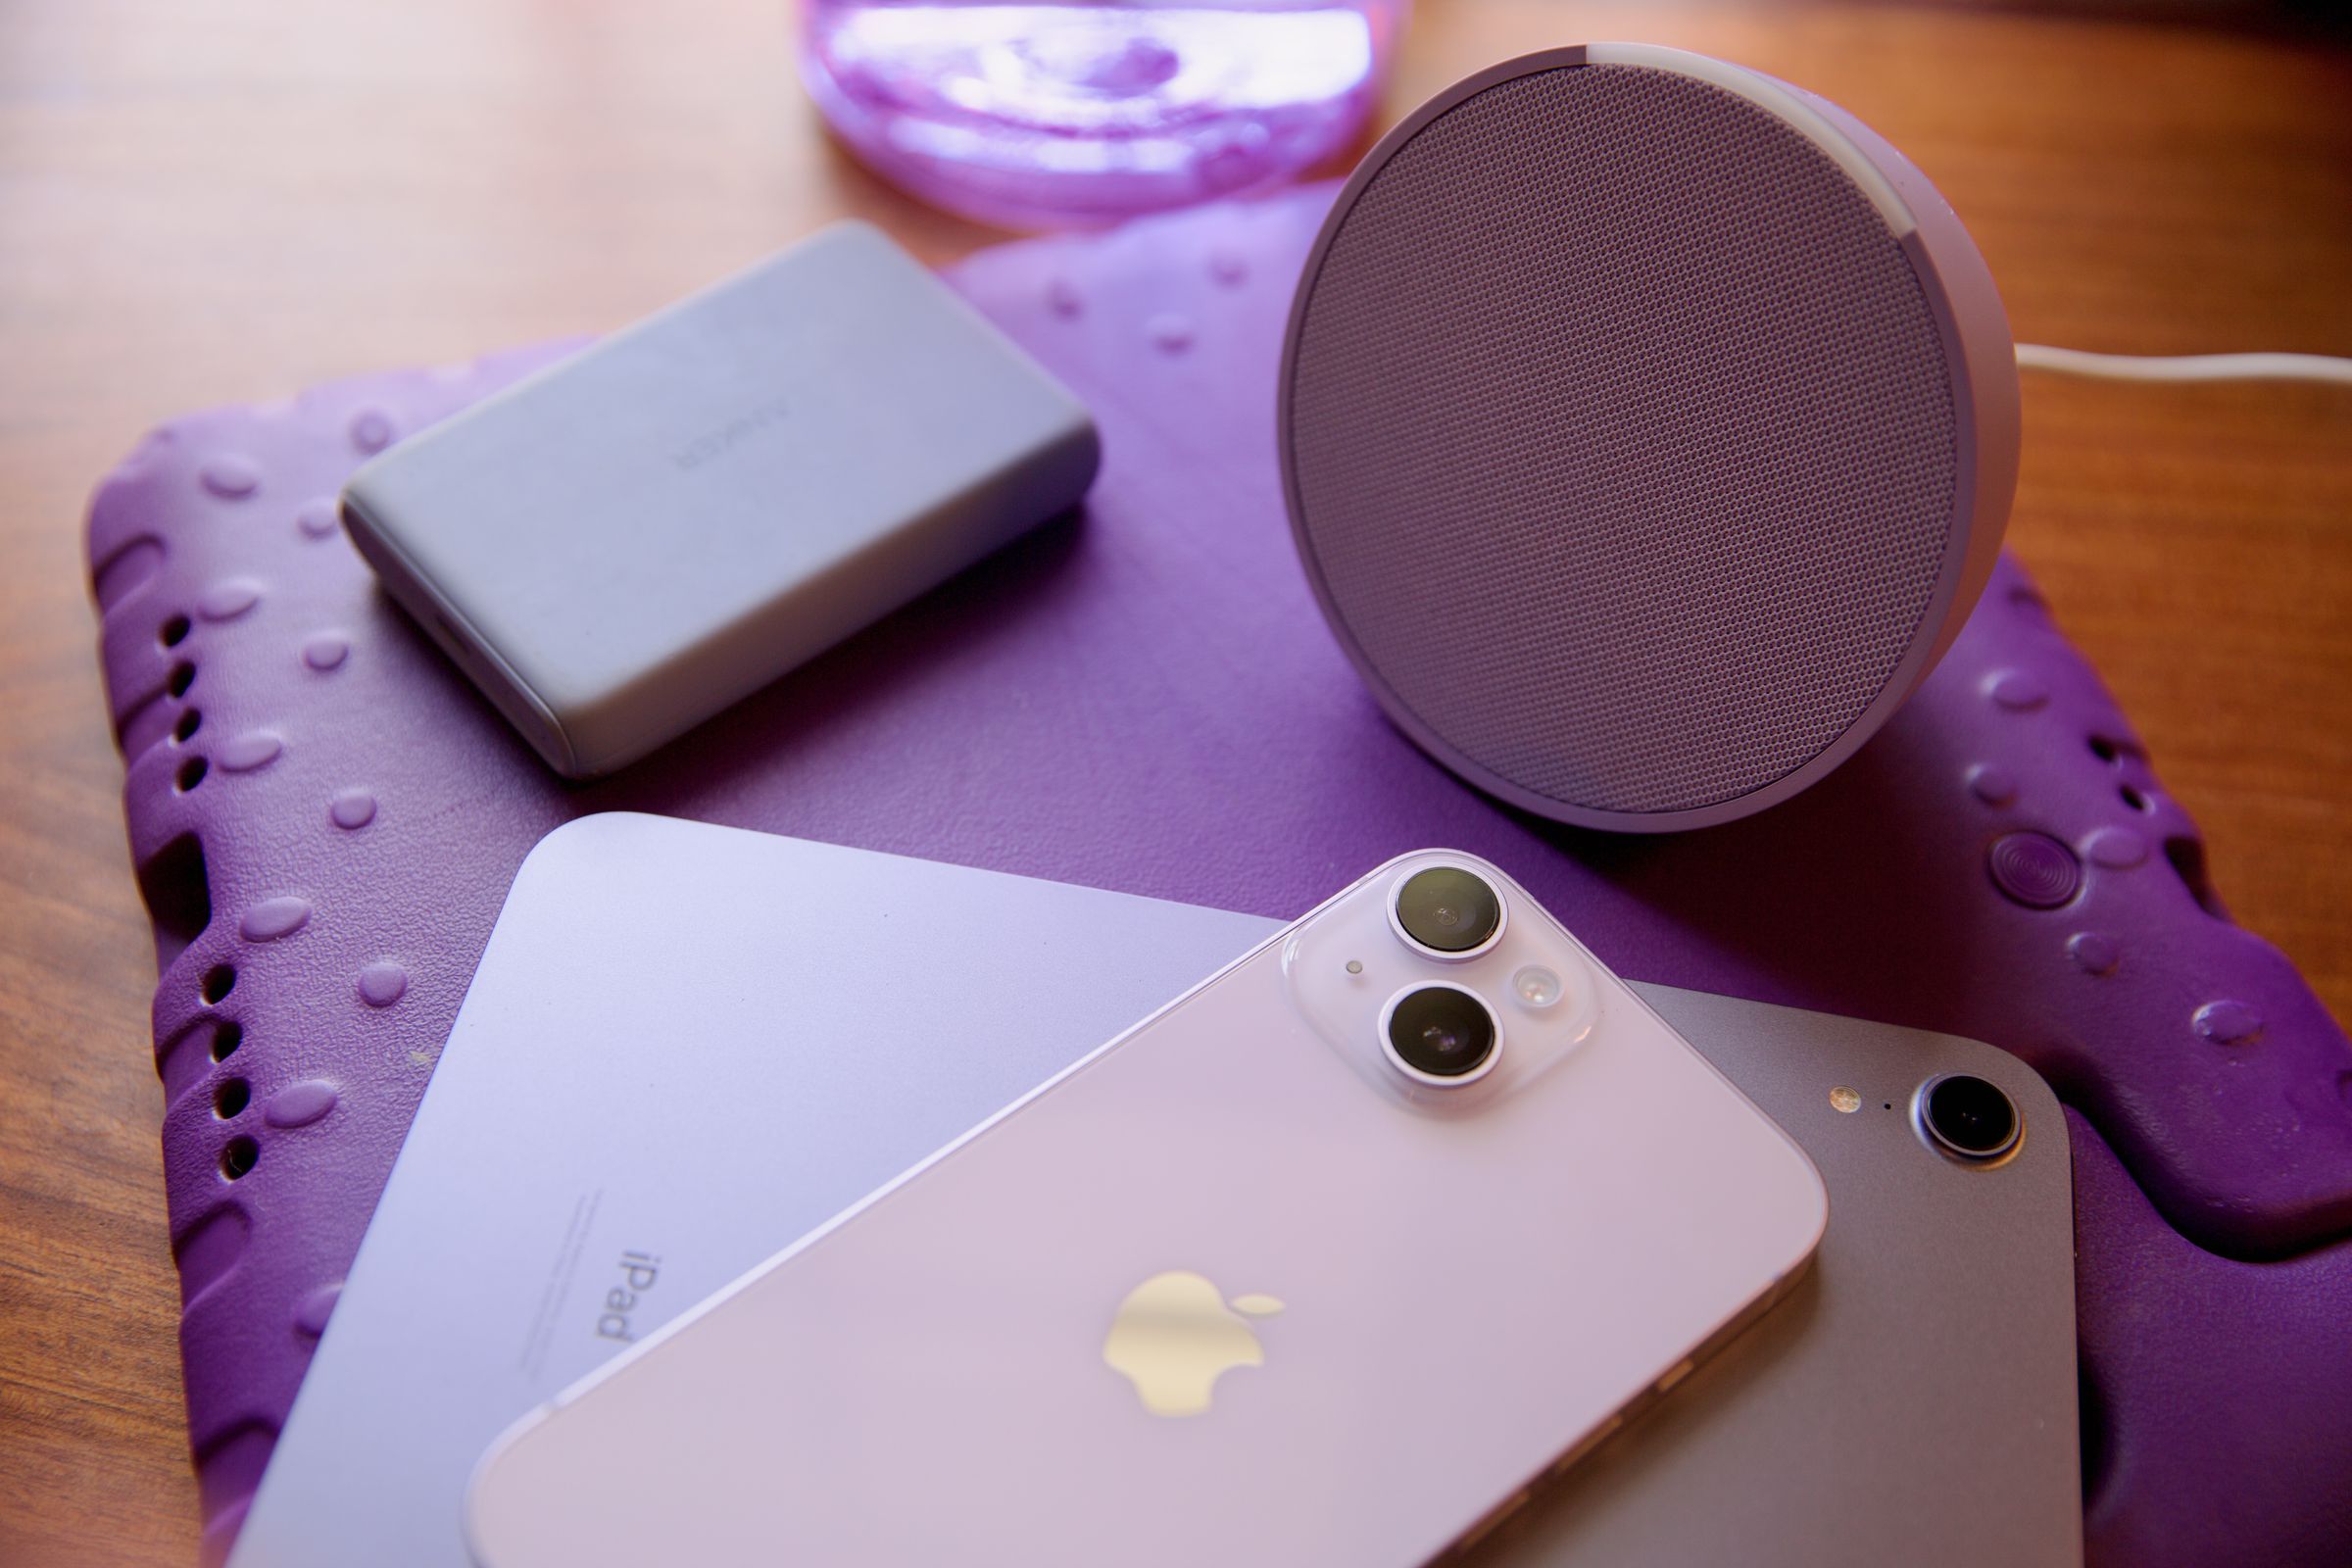 I may have a penchant for purple tech products, and the Pop fit right in.